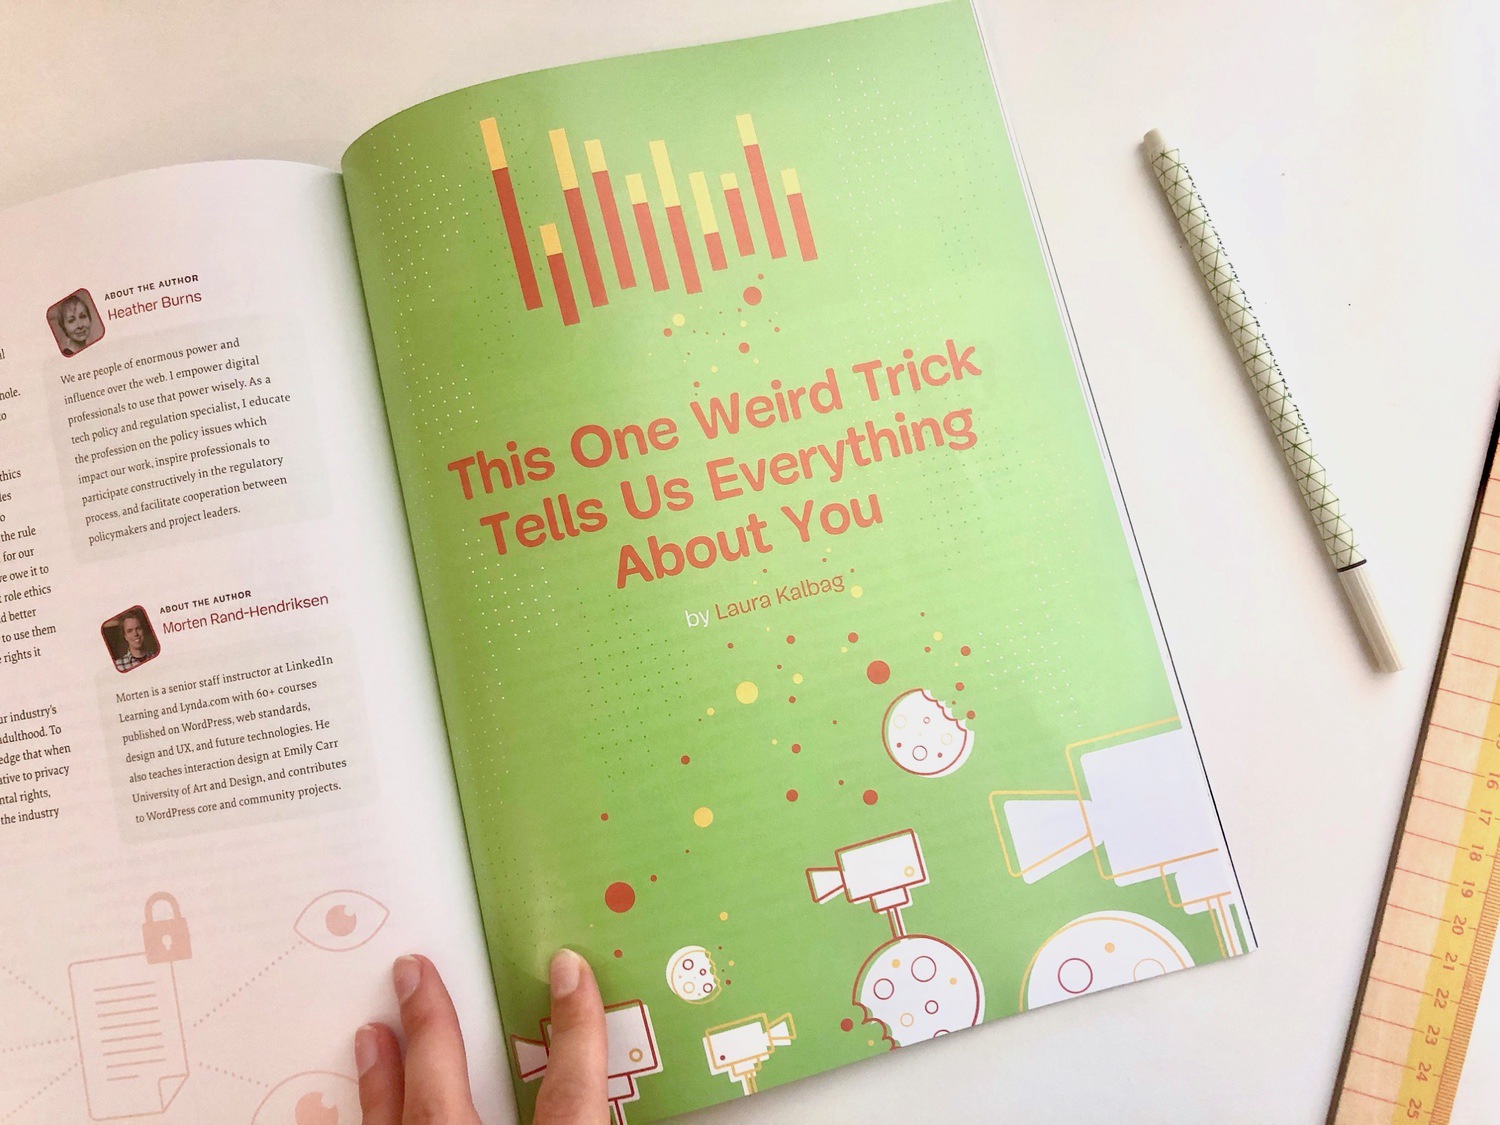 Inside pages of printed magazine showing my essay title page titled “This One Weird Trick Tells Us Everything About You”.